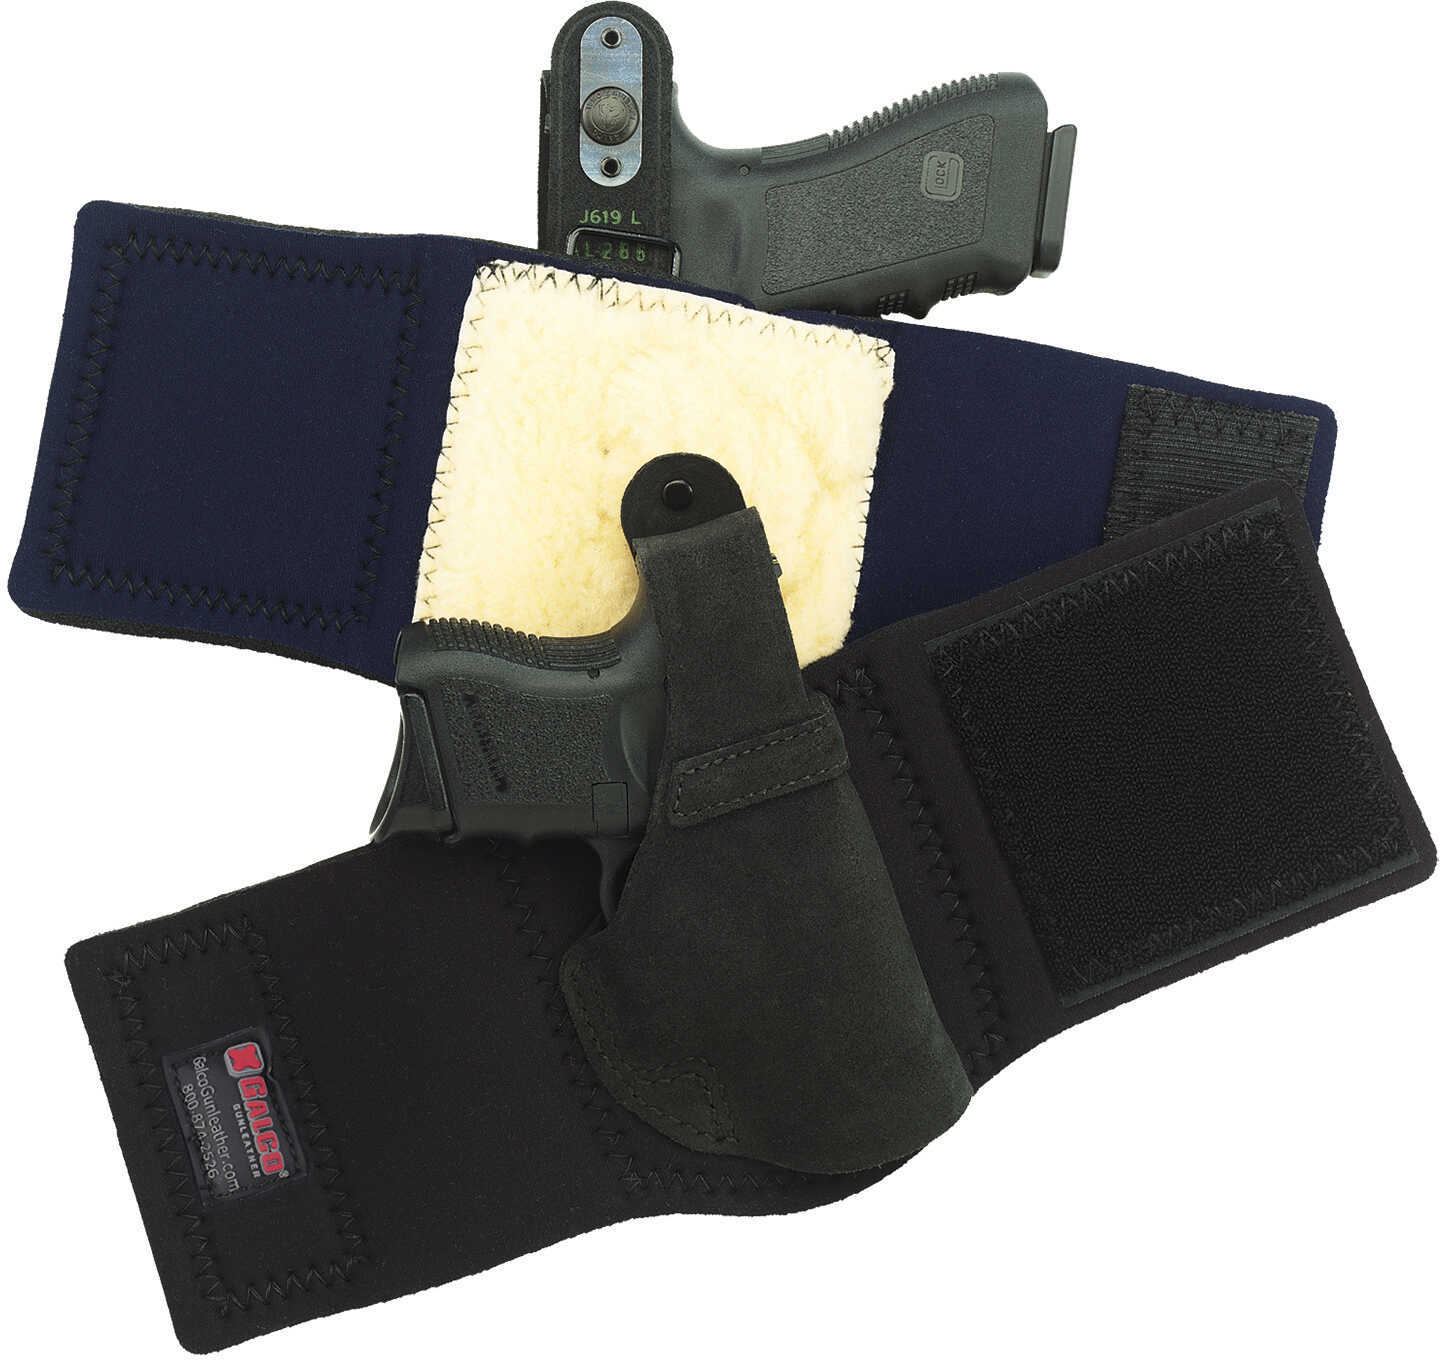 Galco Ankle Lite Holster Fits Ruger LCR Right Hand Black Leather AL300B